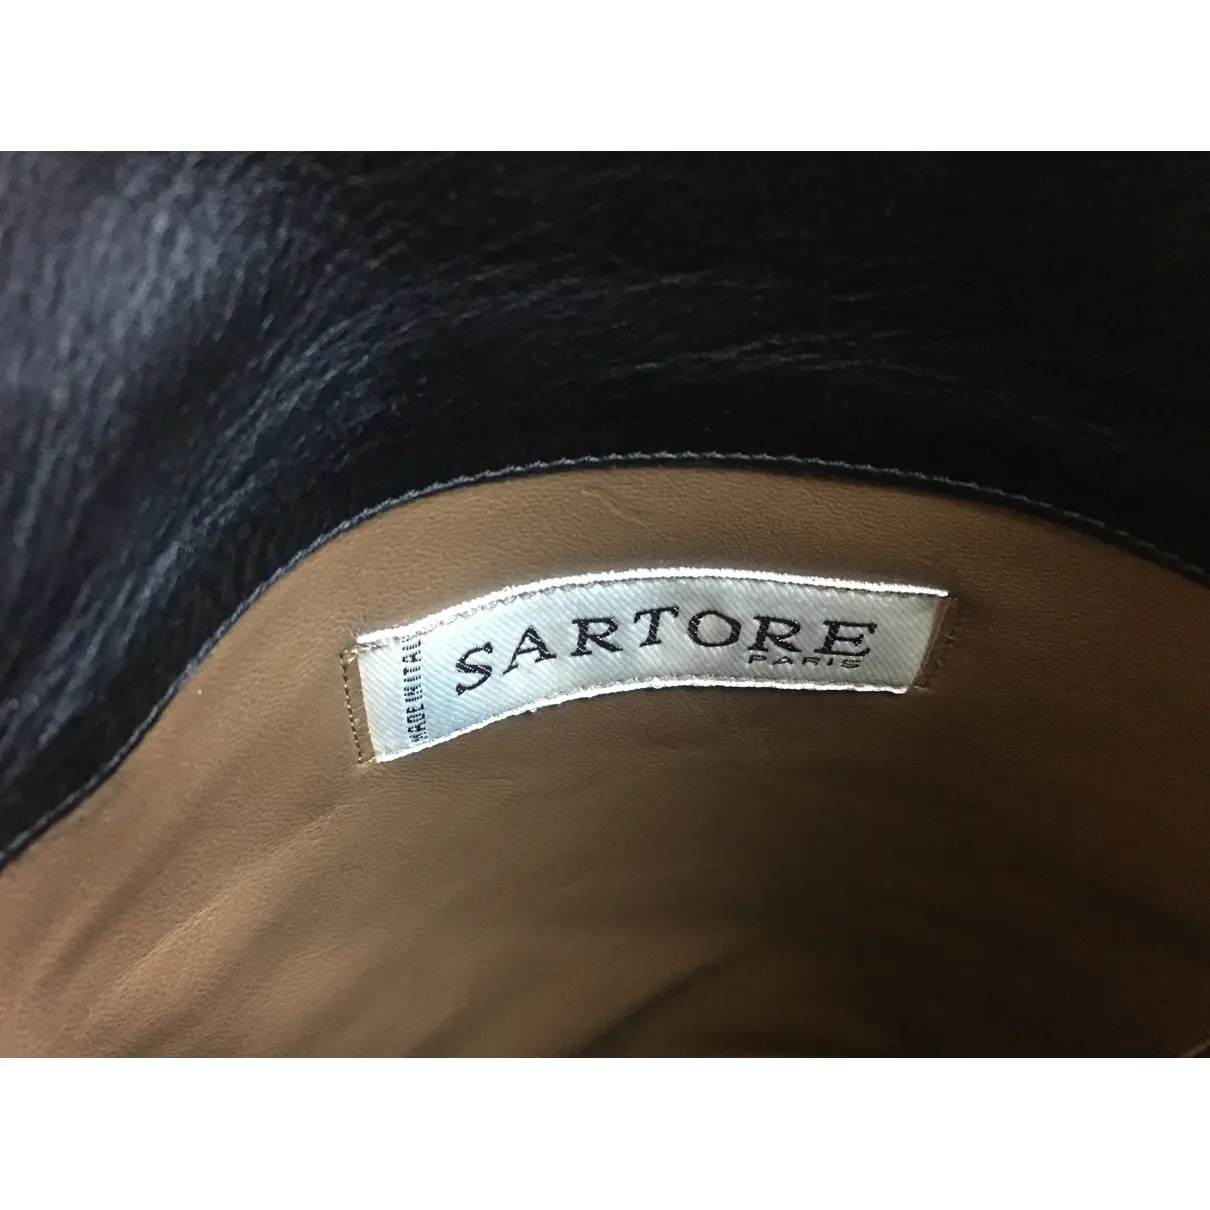 Leather boots Sartore